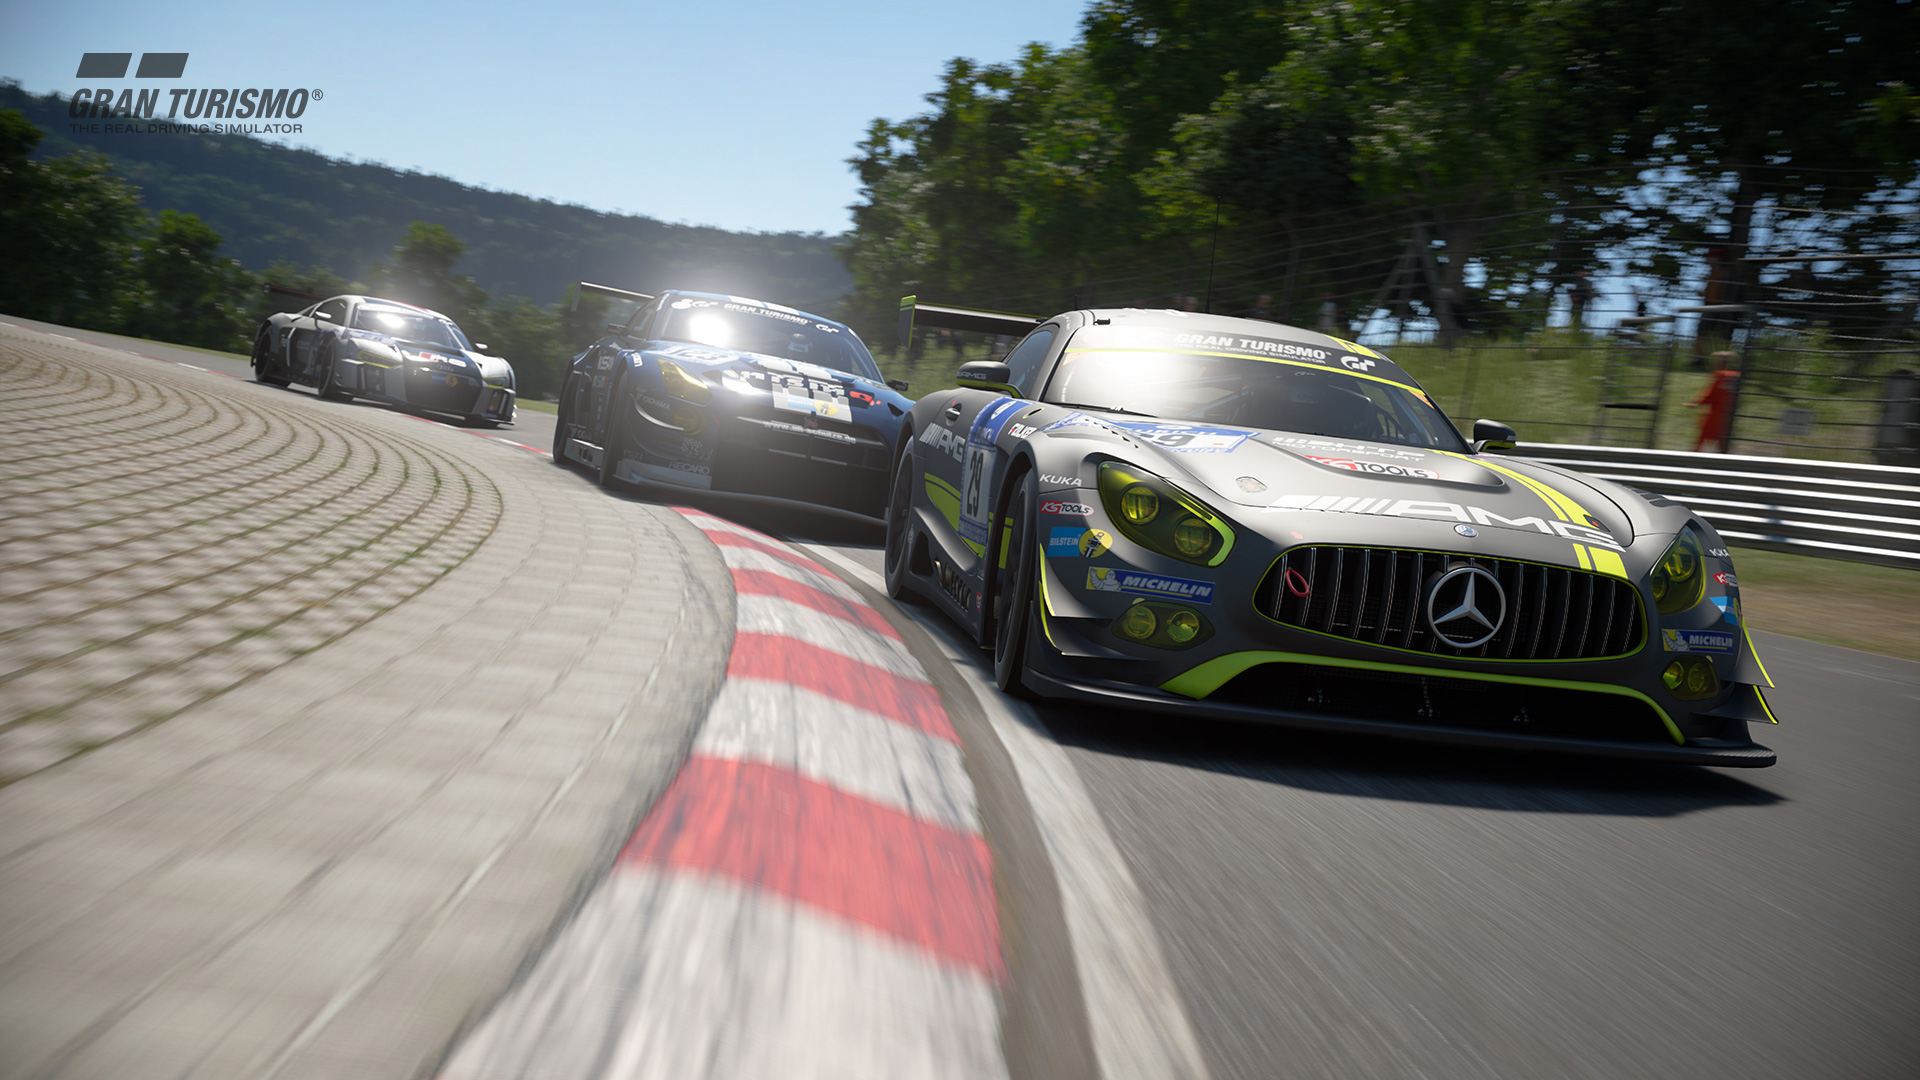 Gran Turismo 7 has Sony's lowest Metacritic user score and deserves it